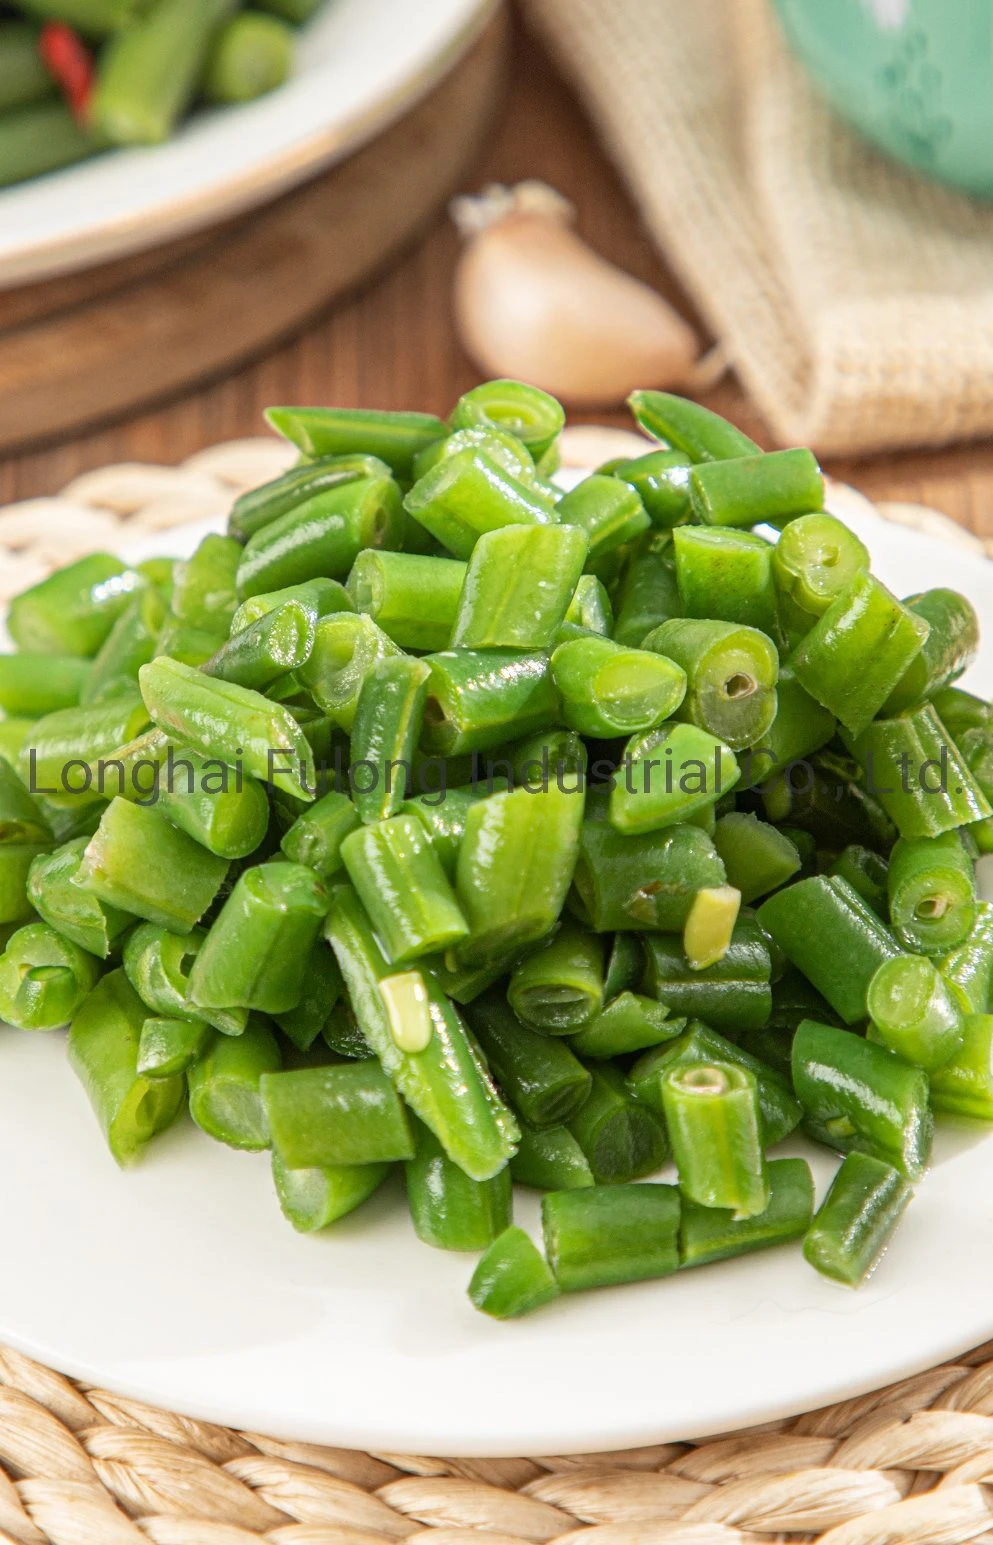 Top Quality Frozen Green Beans Cuts IQF Green Beans Cuts New Harvest